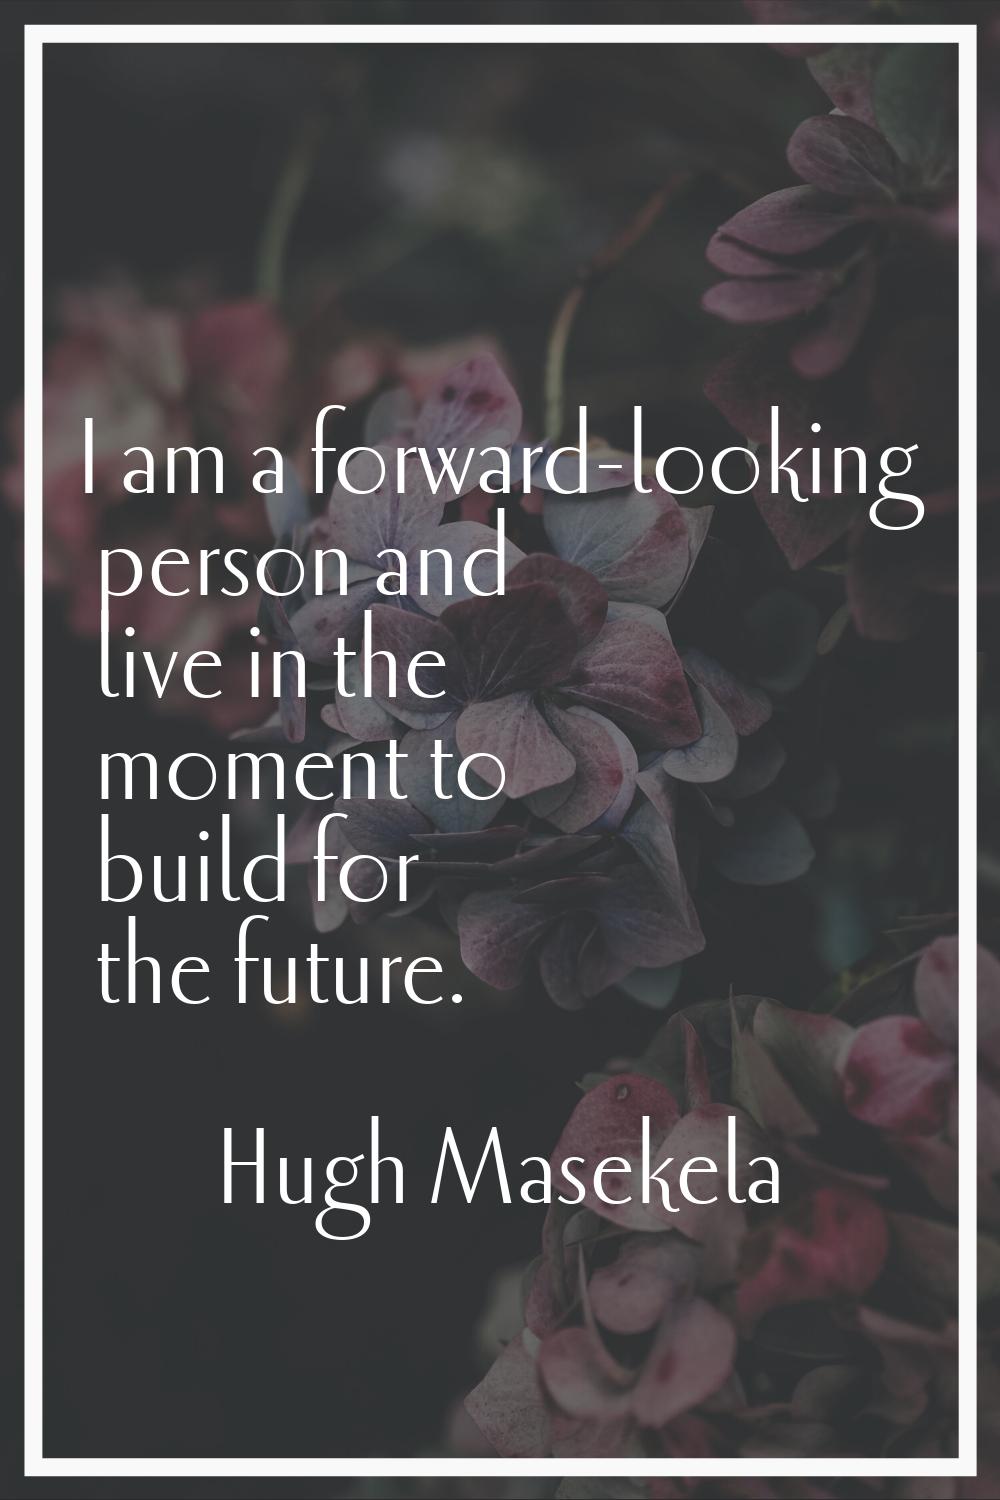 I am a forward-looking person and live in the moment to build for the future.